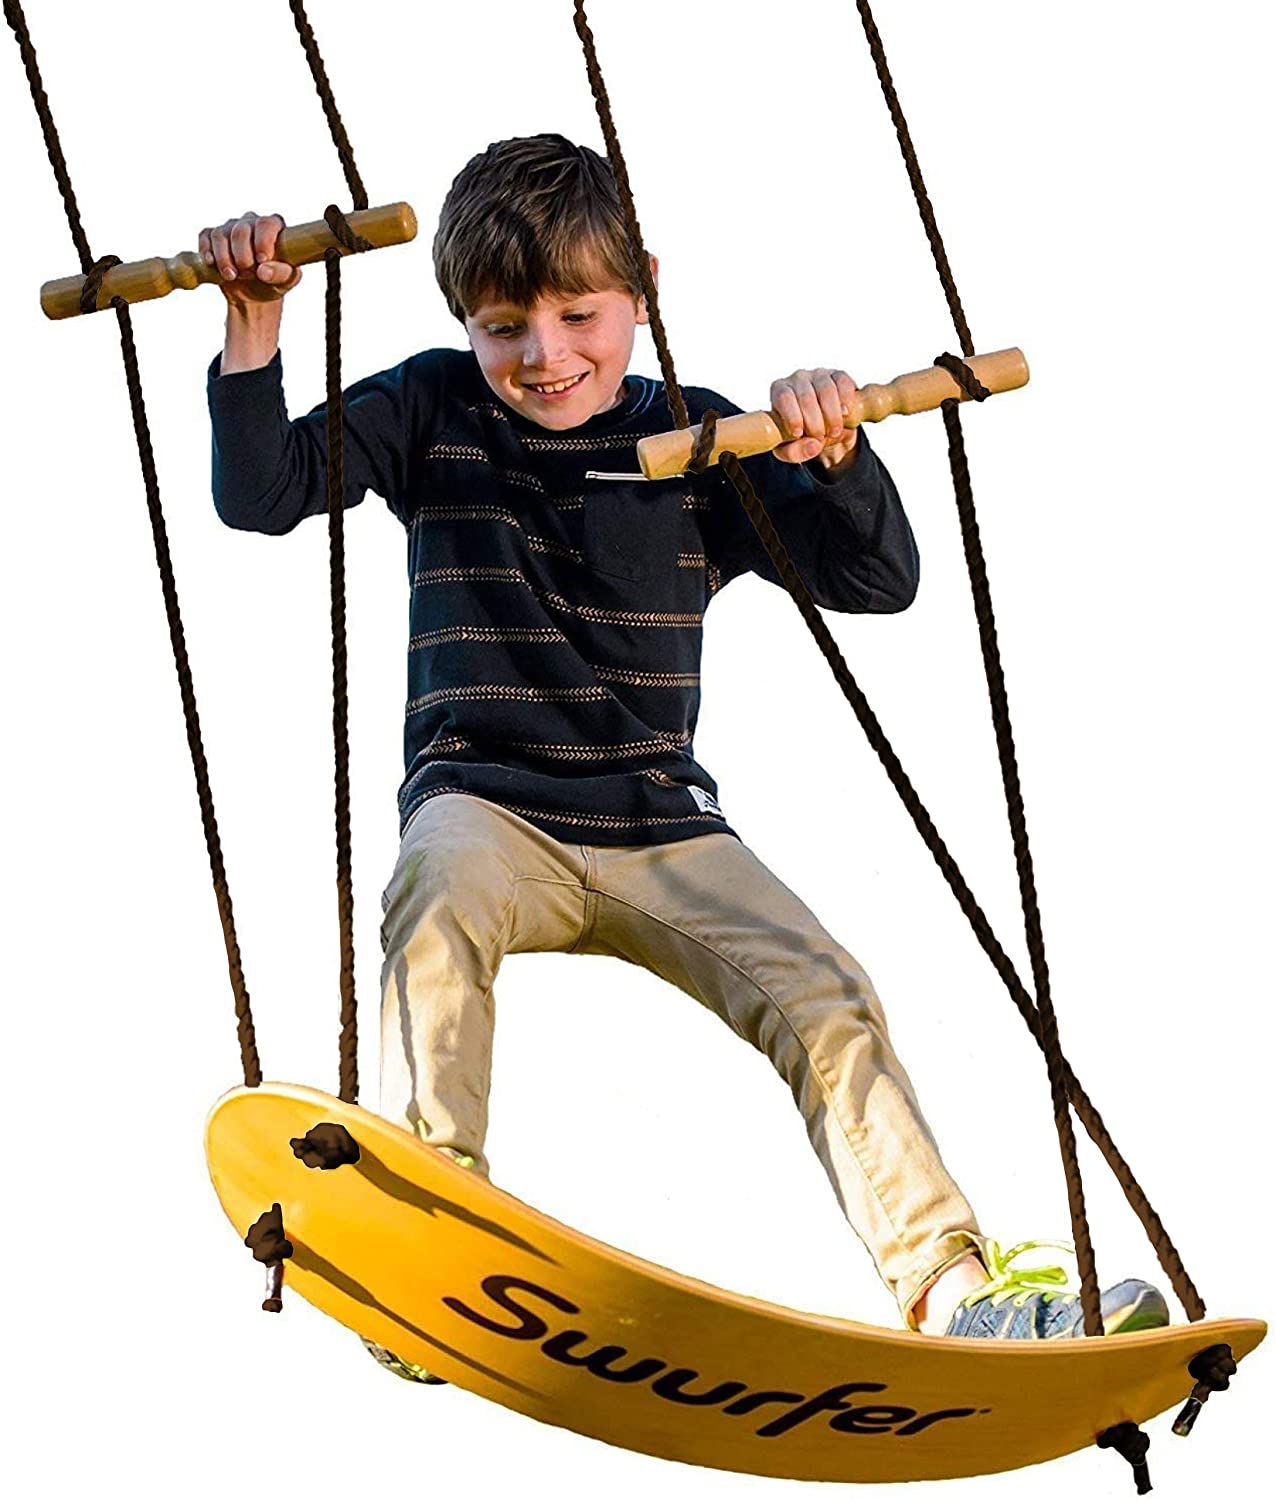 Review of Swurfer - the Original Stand Up Surfing Swing - Curved Maple Wood Board